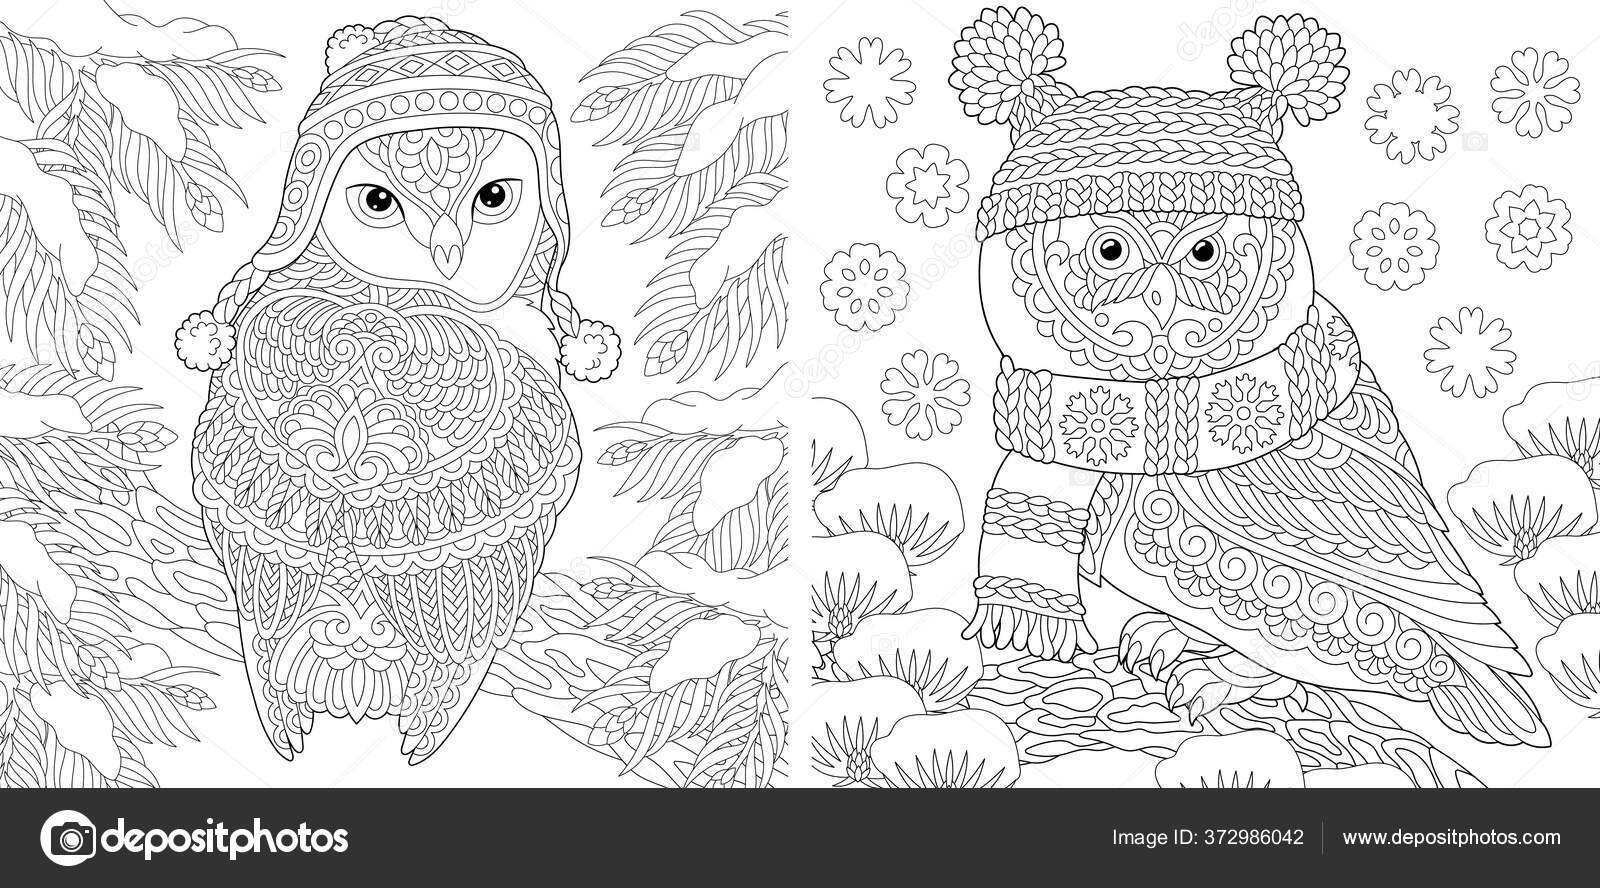 Animal Coloring Pages Cute Owls Winter Hats Line Art Design Stock ...